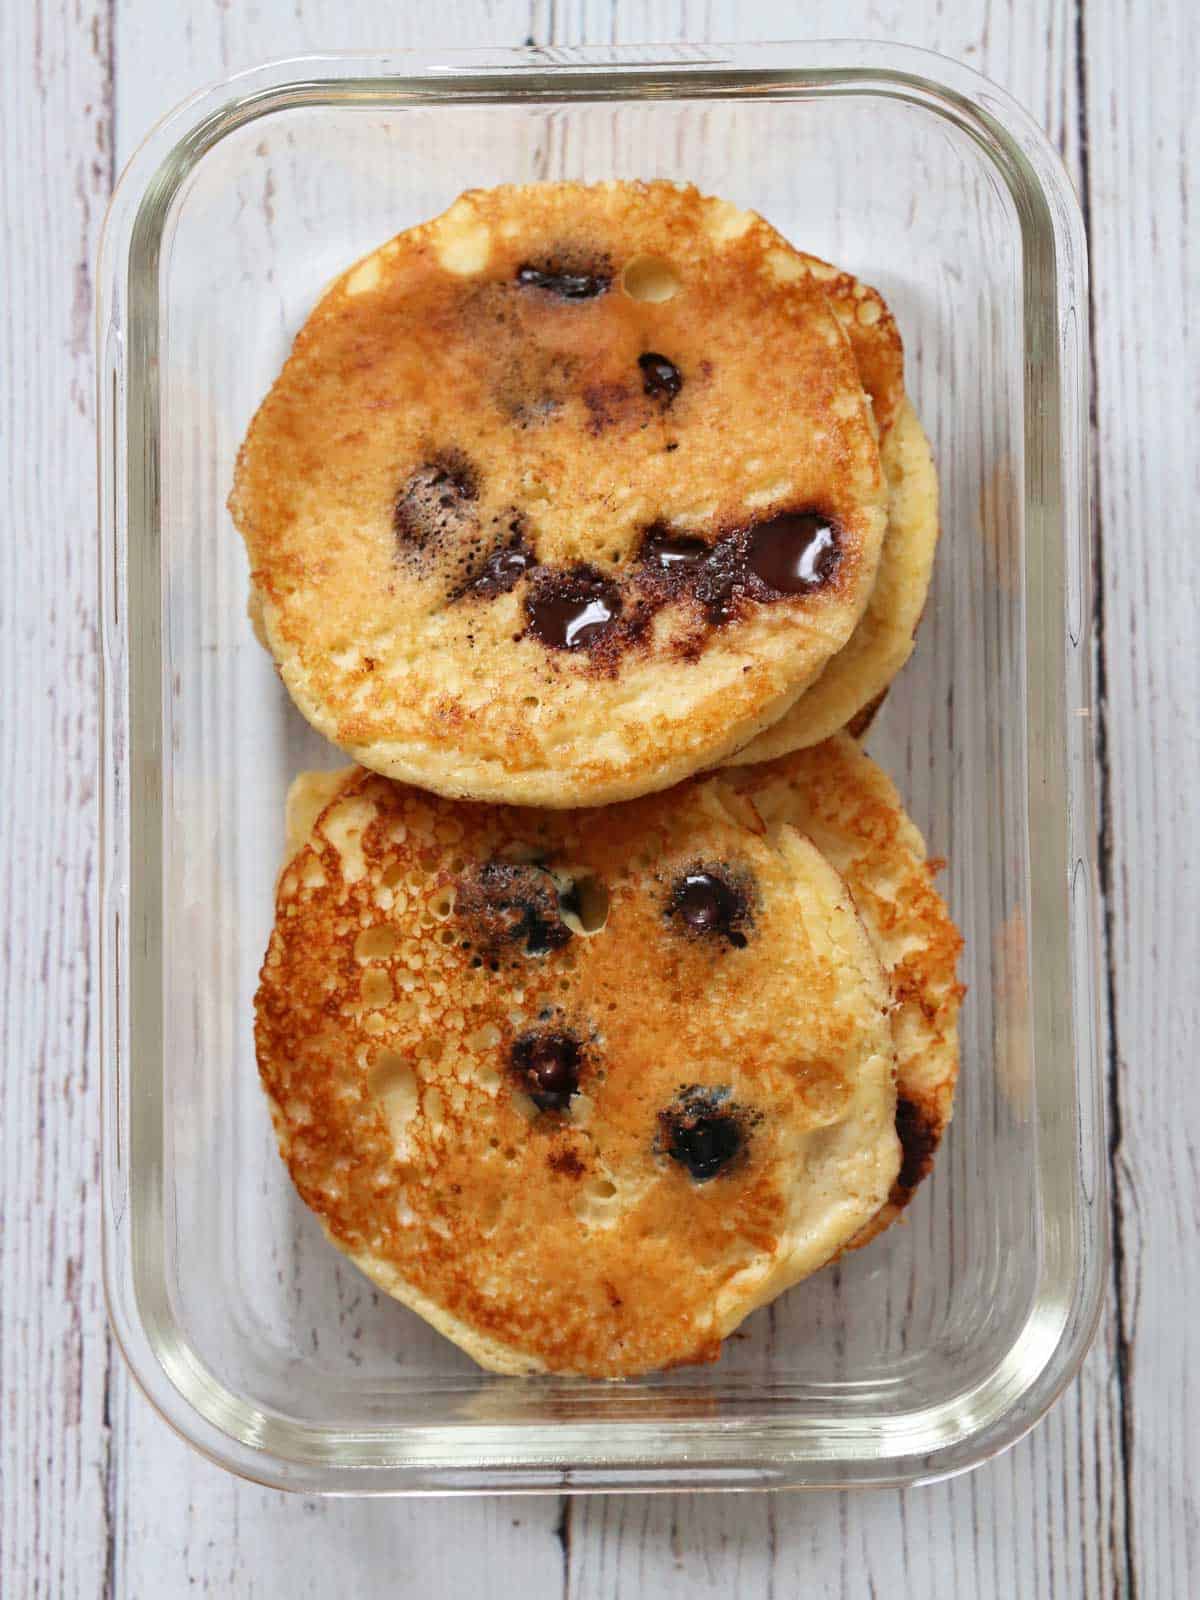 Leftover protein pancakes are stored in a glass food storage container.